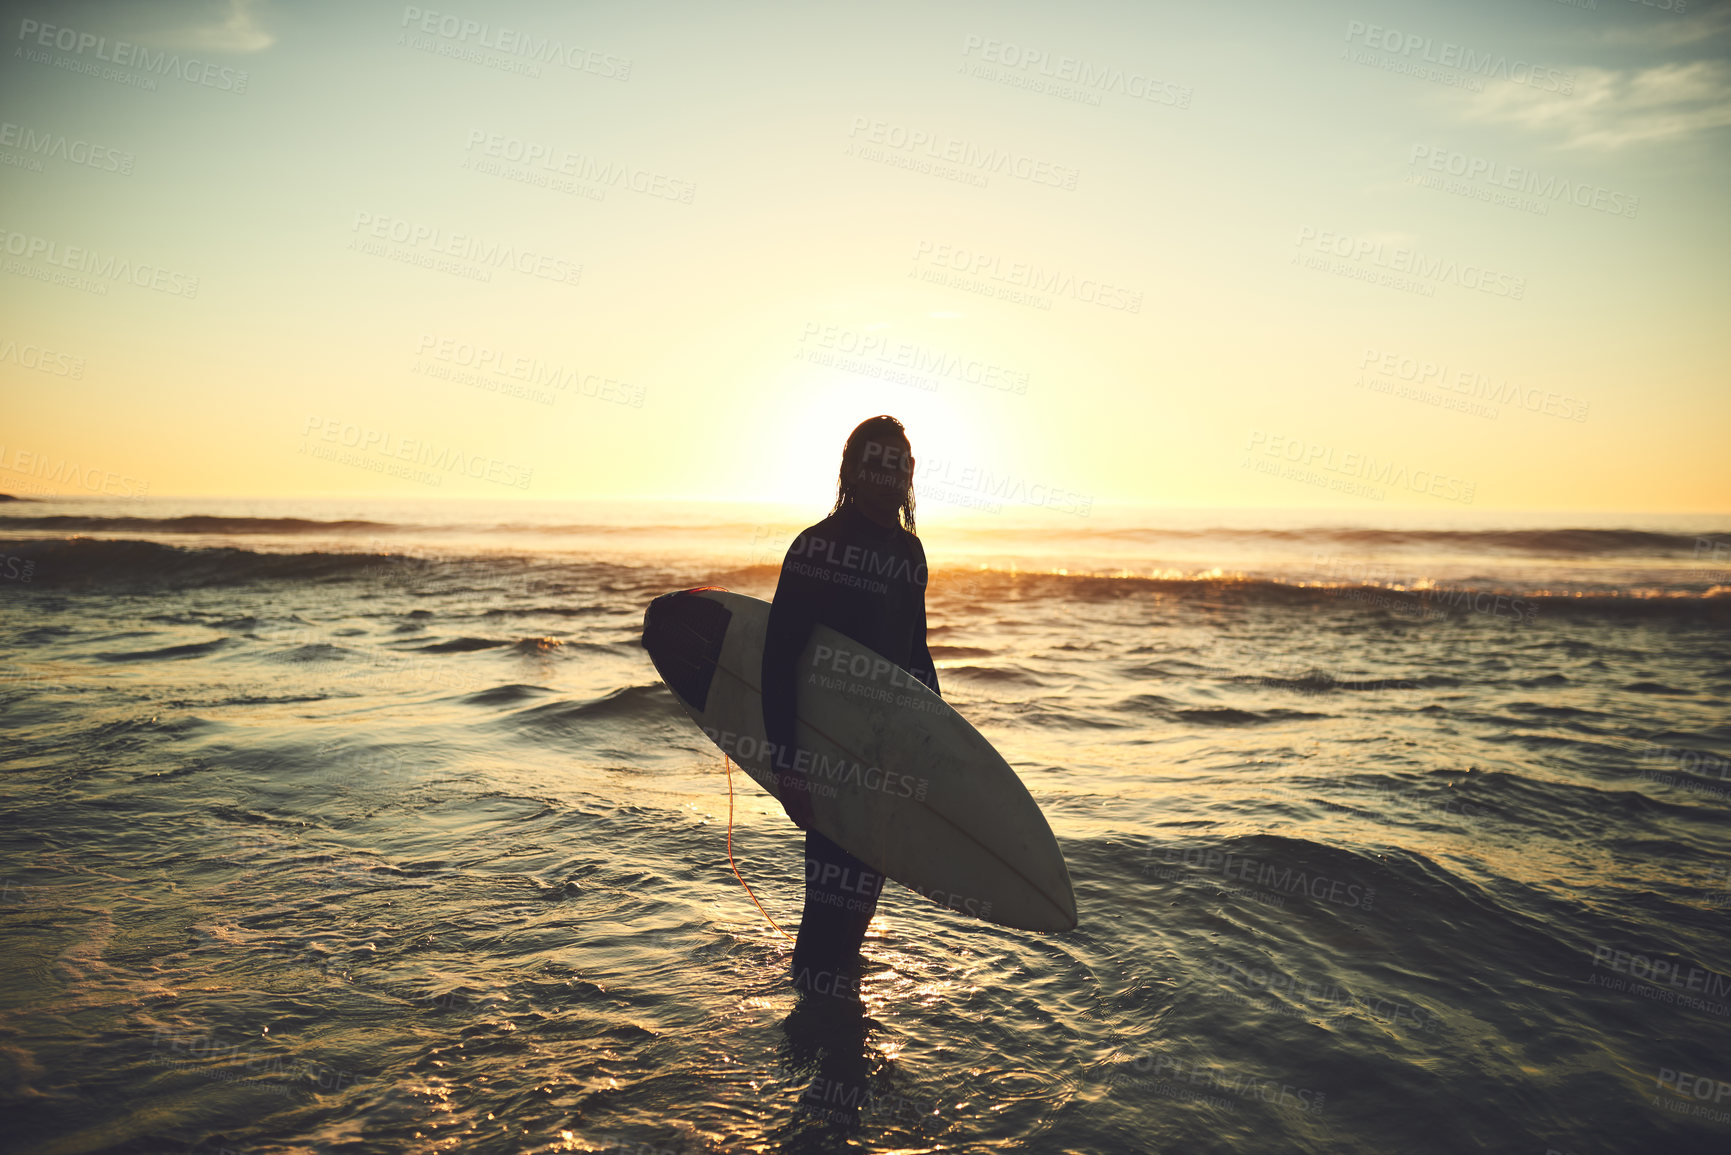 Buy stock photo Shot of a young man carrying a surfboard at the beach